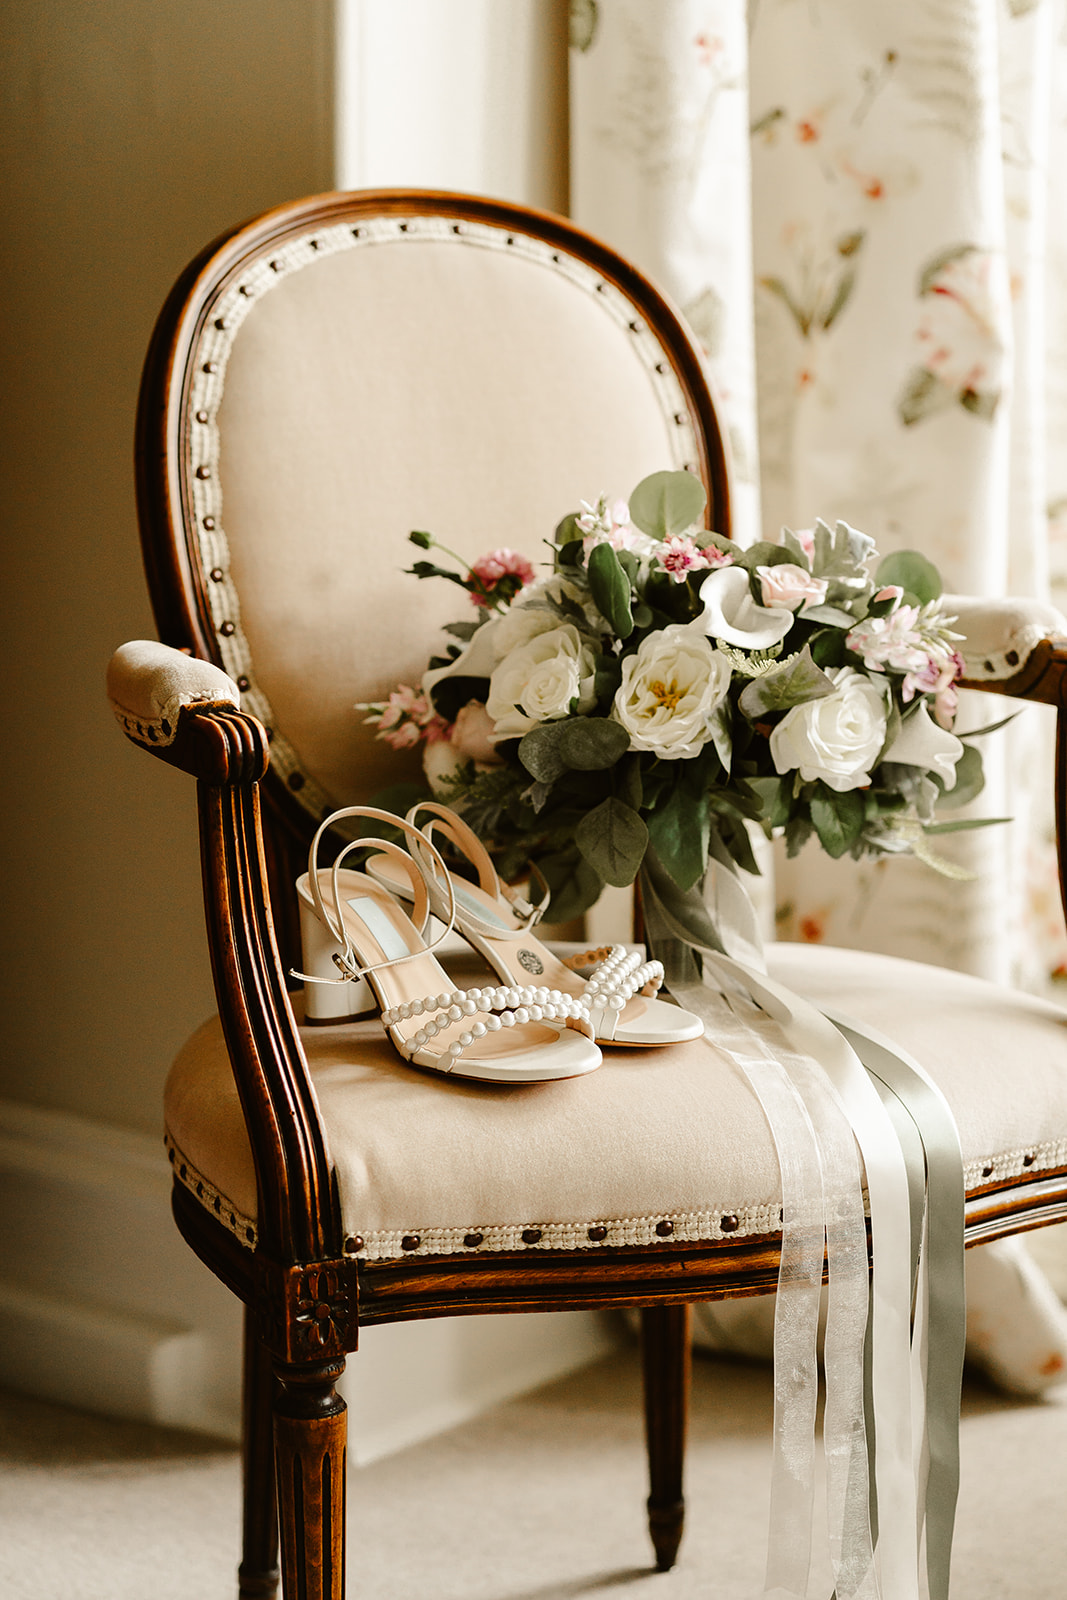 Image of a bridal bouquet on a chair with some gorgeous shoes